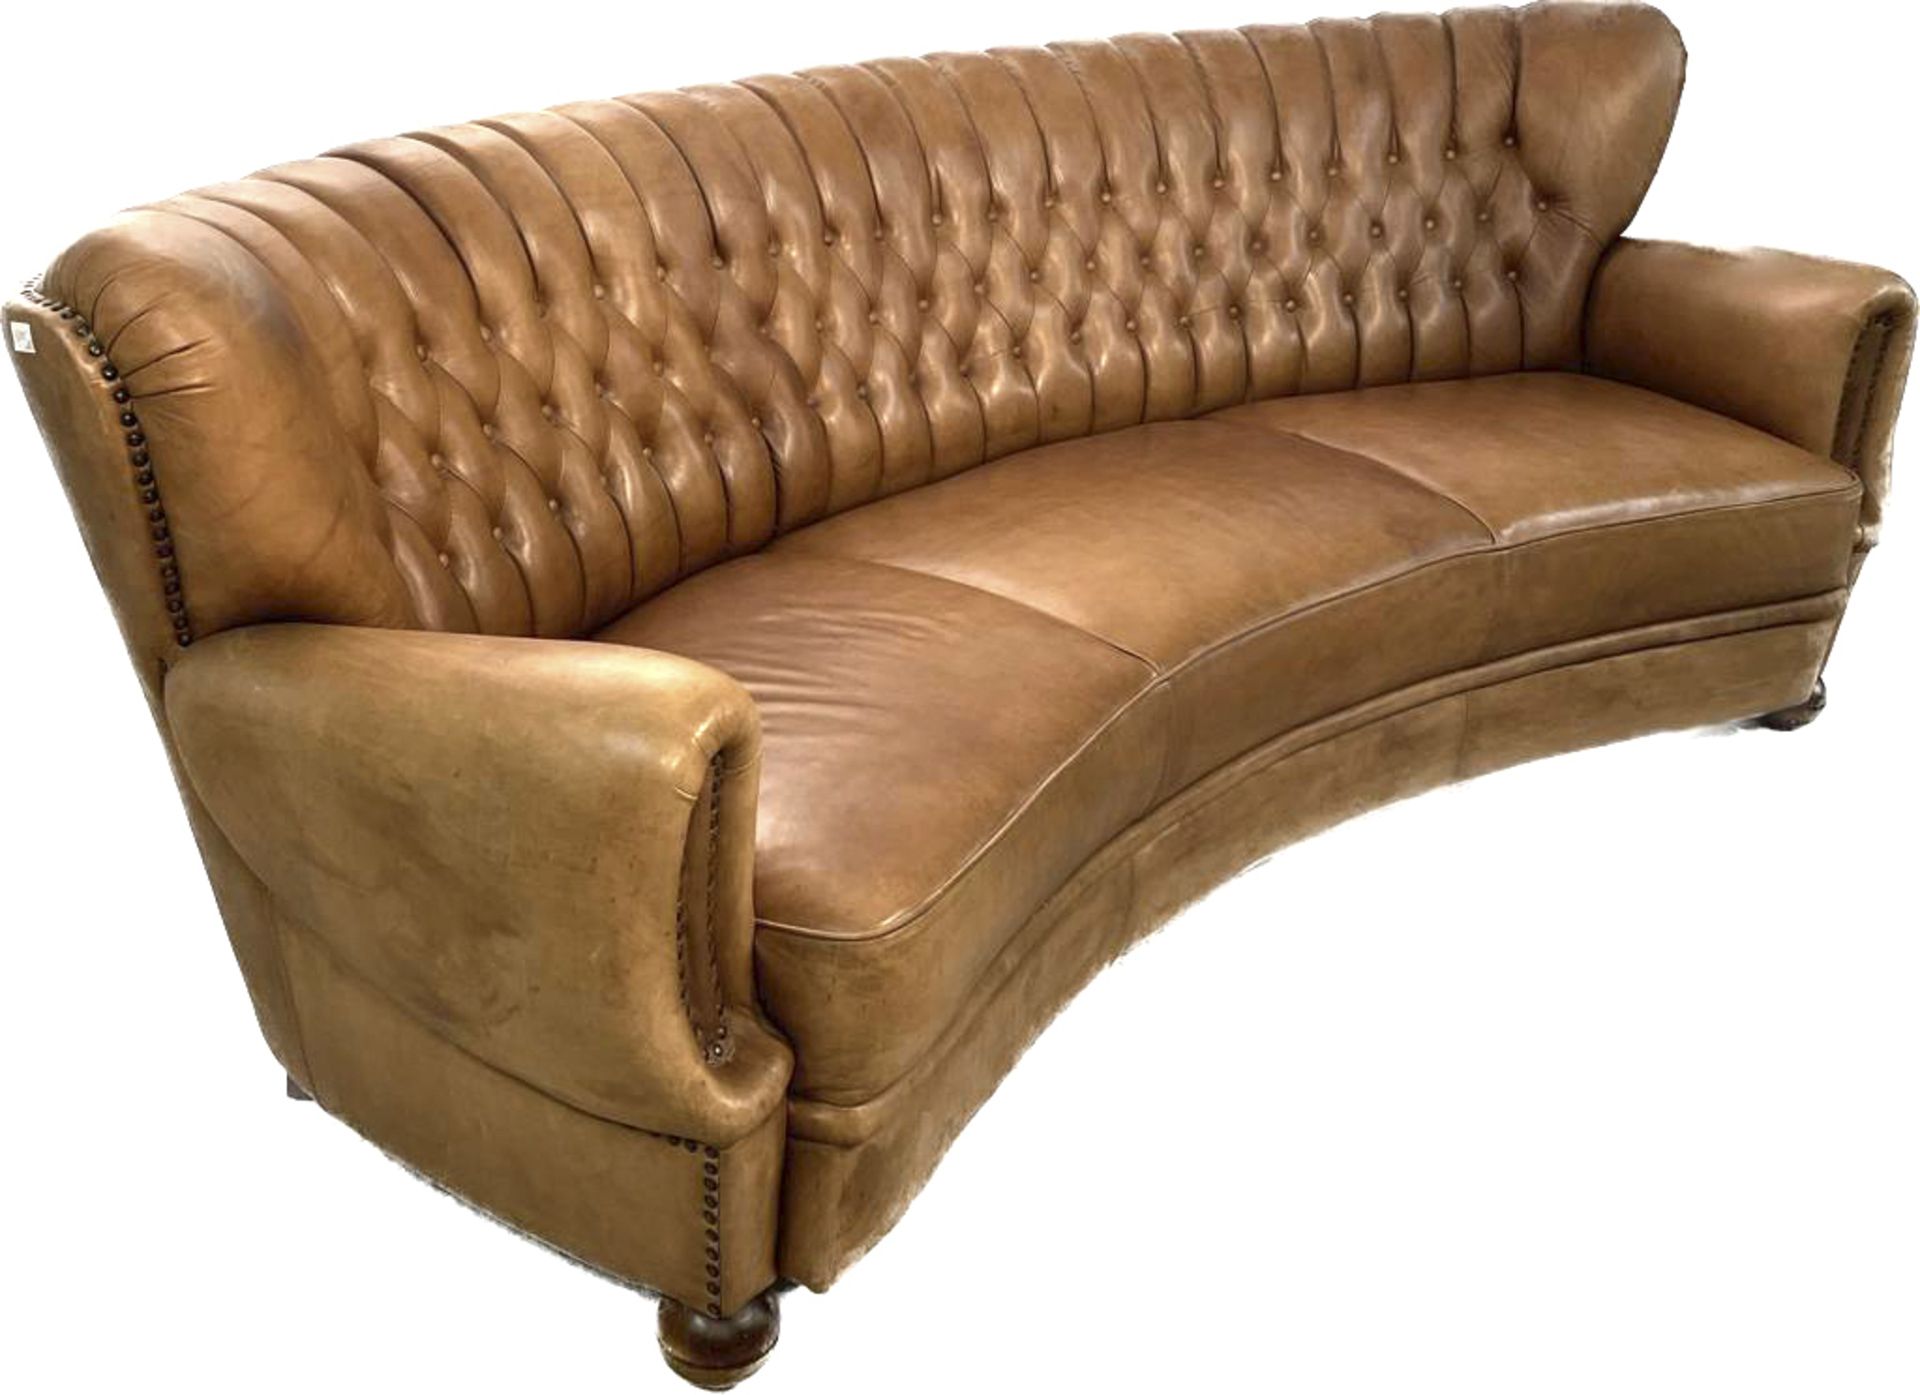 Sofa around 1920/30, leather upholstery, 80 x 230 x 80 cm - The furniture cannot be viewed in our - Image 3 of 3